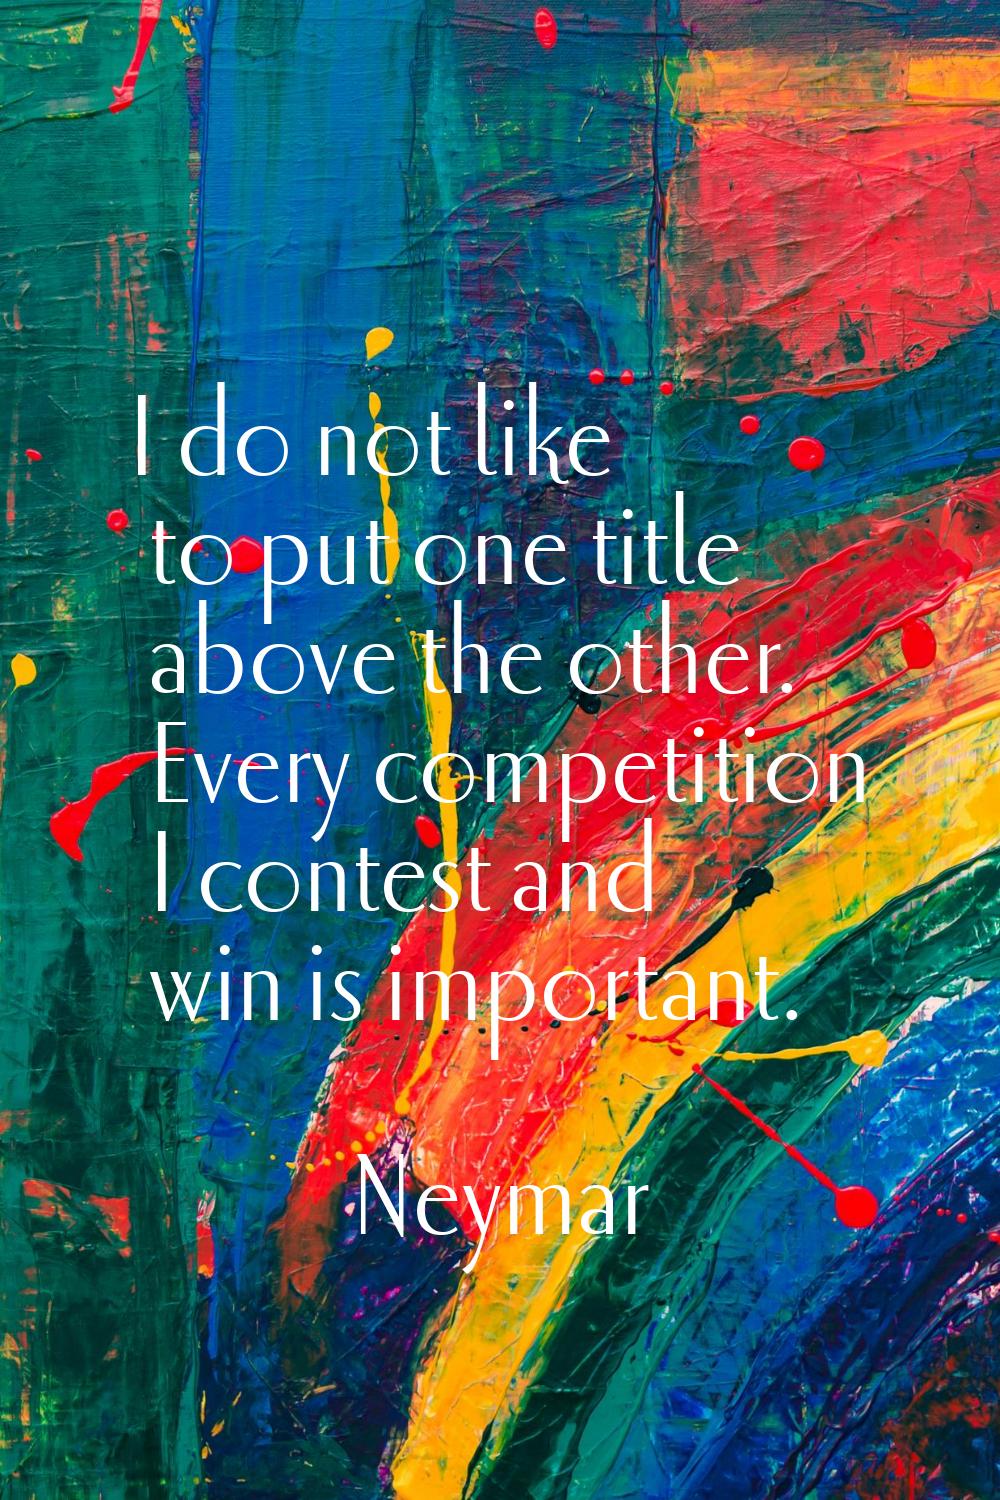 I do not like to put one title above the other. Every competition I contest and win is important.